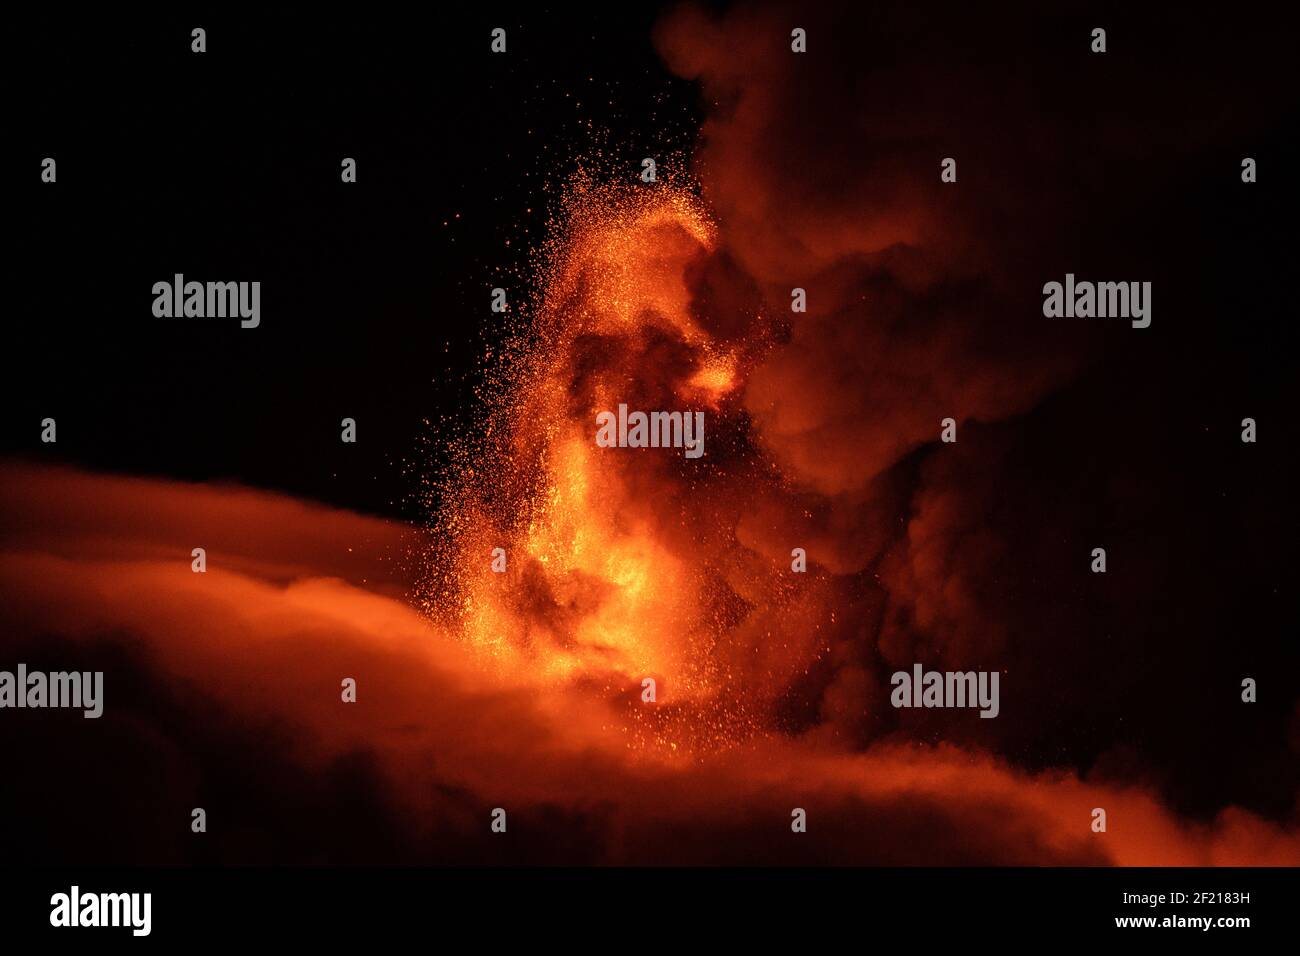 CATANIA, ETNA, ITALY - MARCH 10, 2021: New eruption of the Etna volcano in sicily.  Lava fountains and a huge plume of gas and pyroclastic ash dal Cratere di sudest. Credit: Wead/Alamy Live News Stock Photo